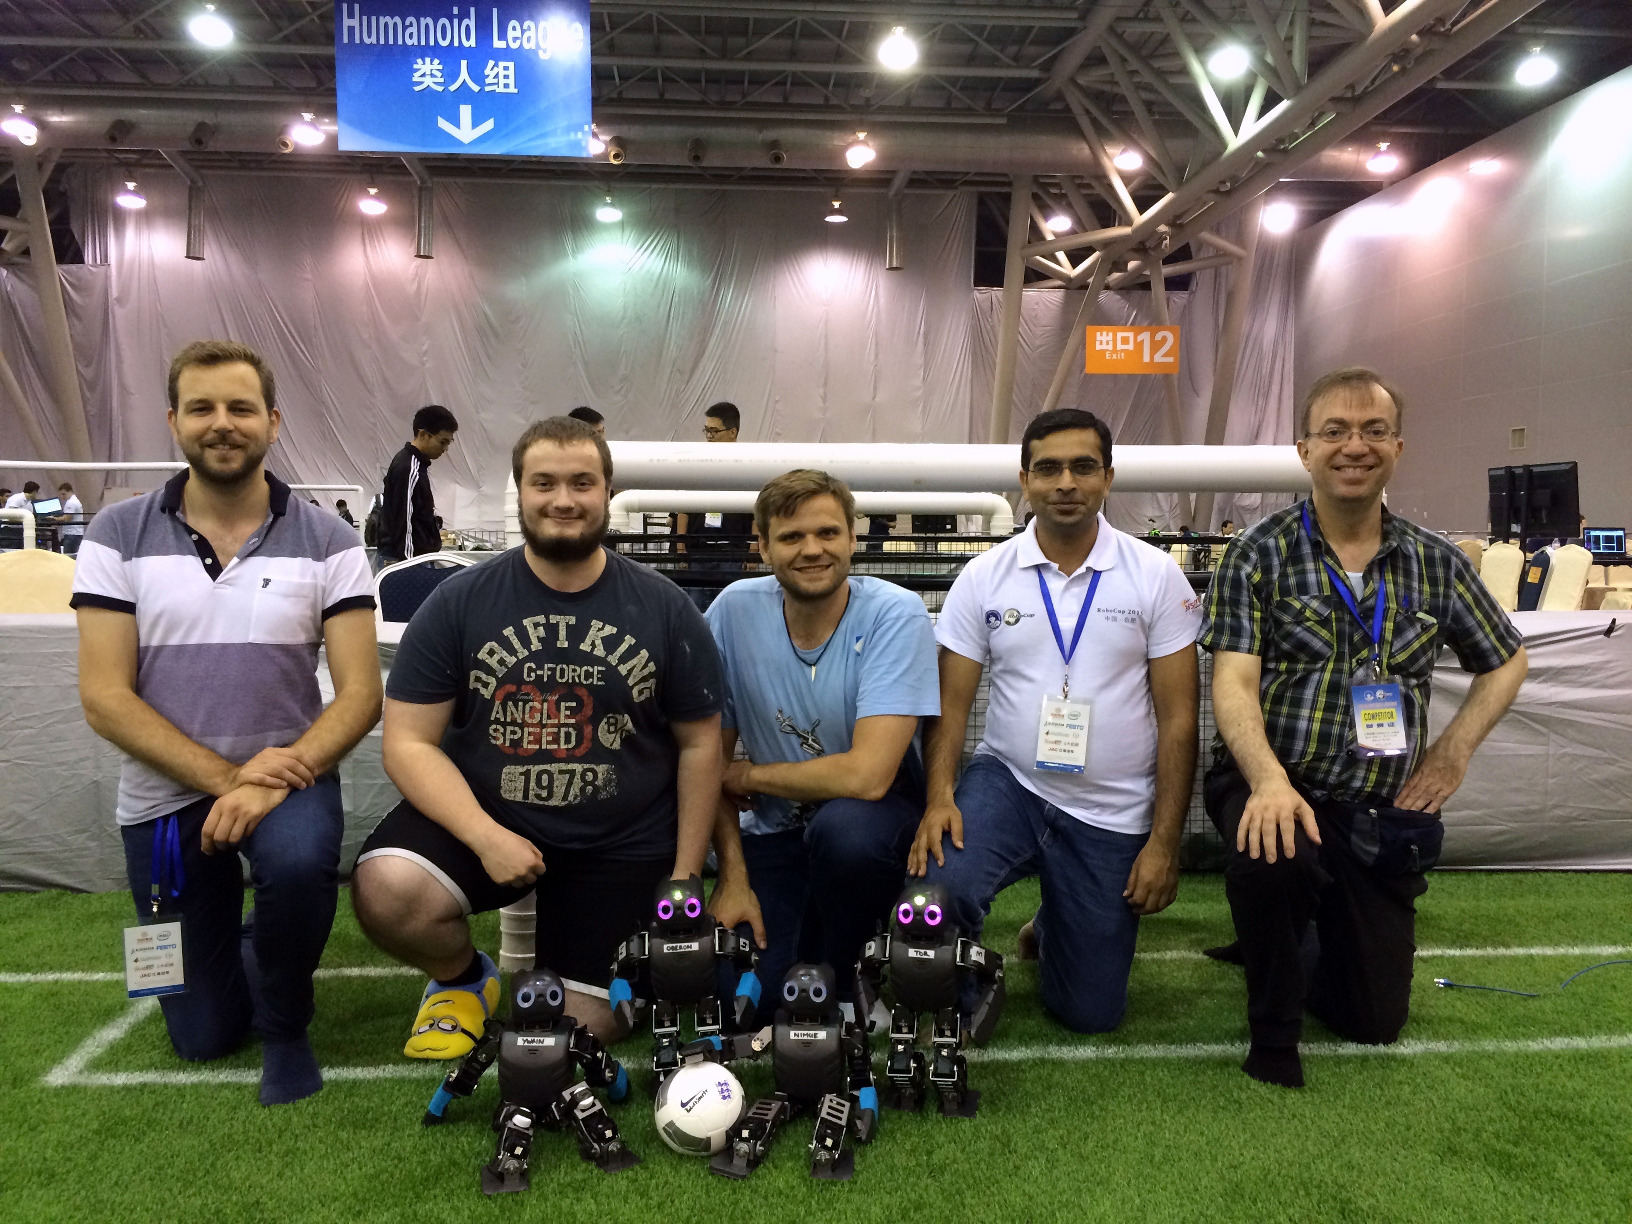 Team Bold Hearts at RoboCup 2015 in Hefei, China